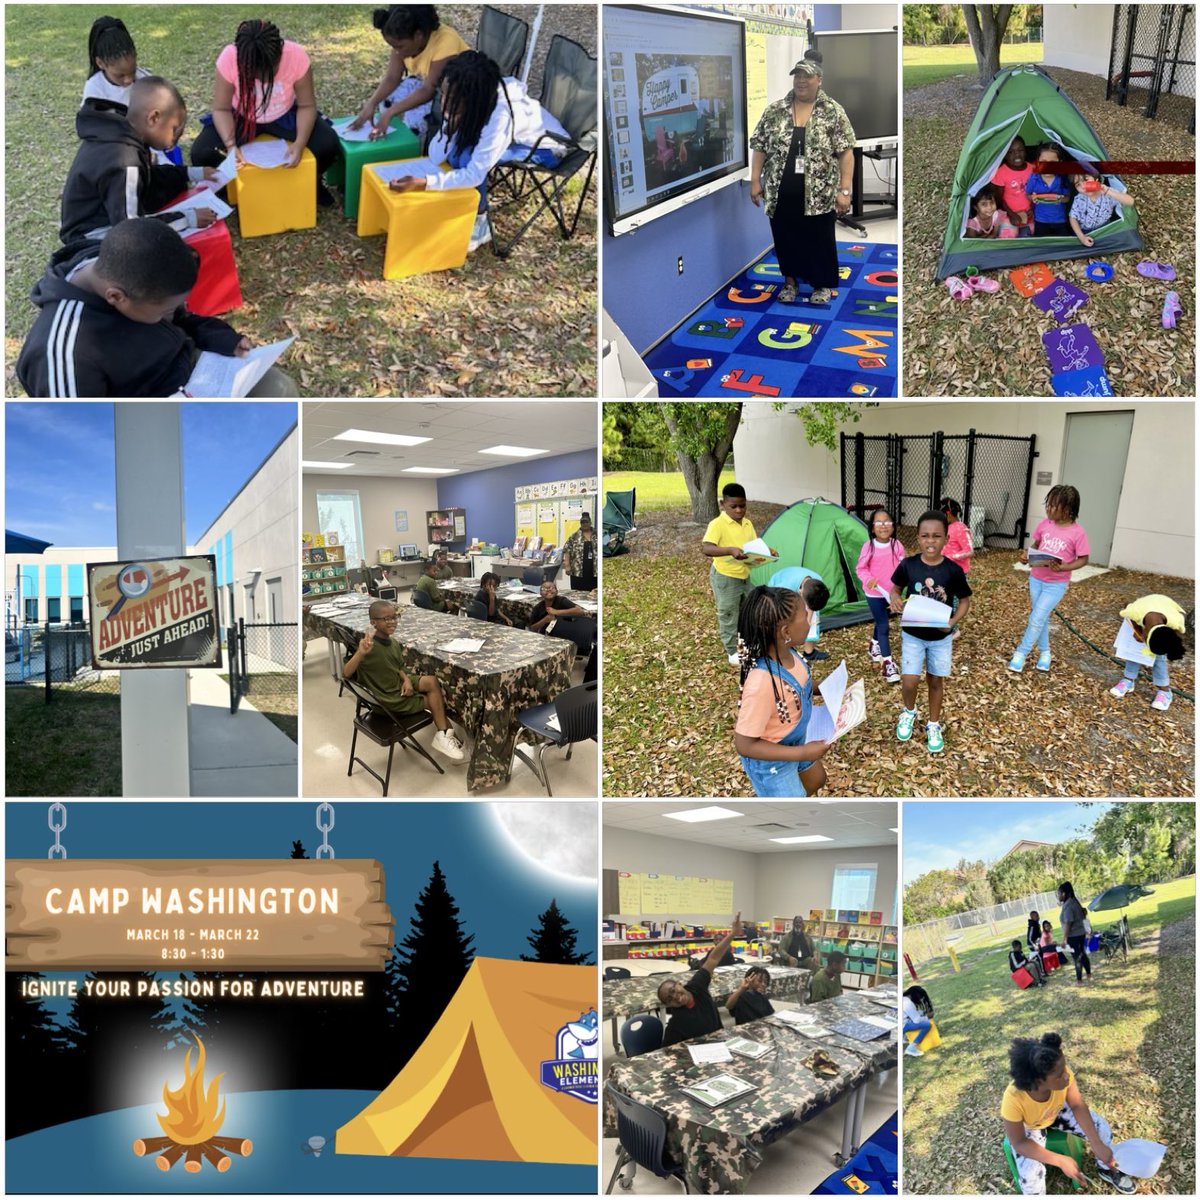 Day 1 of @WashingtonElem5 camp-themed spring break academy was a wild success! Ss embraced the spirit of adventure, teamwork, and nature exploration. From pitching tents to reading by the campfire, it was a day filled with laughter and memories 🏕️🔥 #SpringBreak #CampVibes